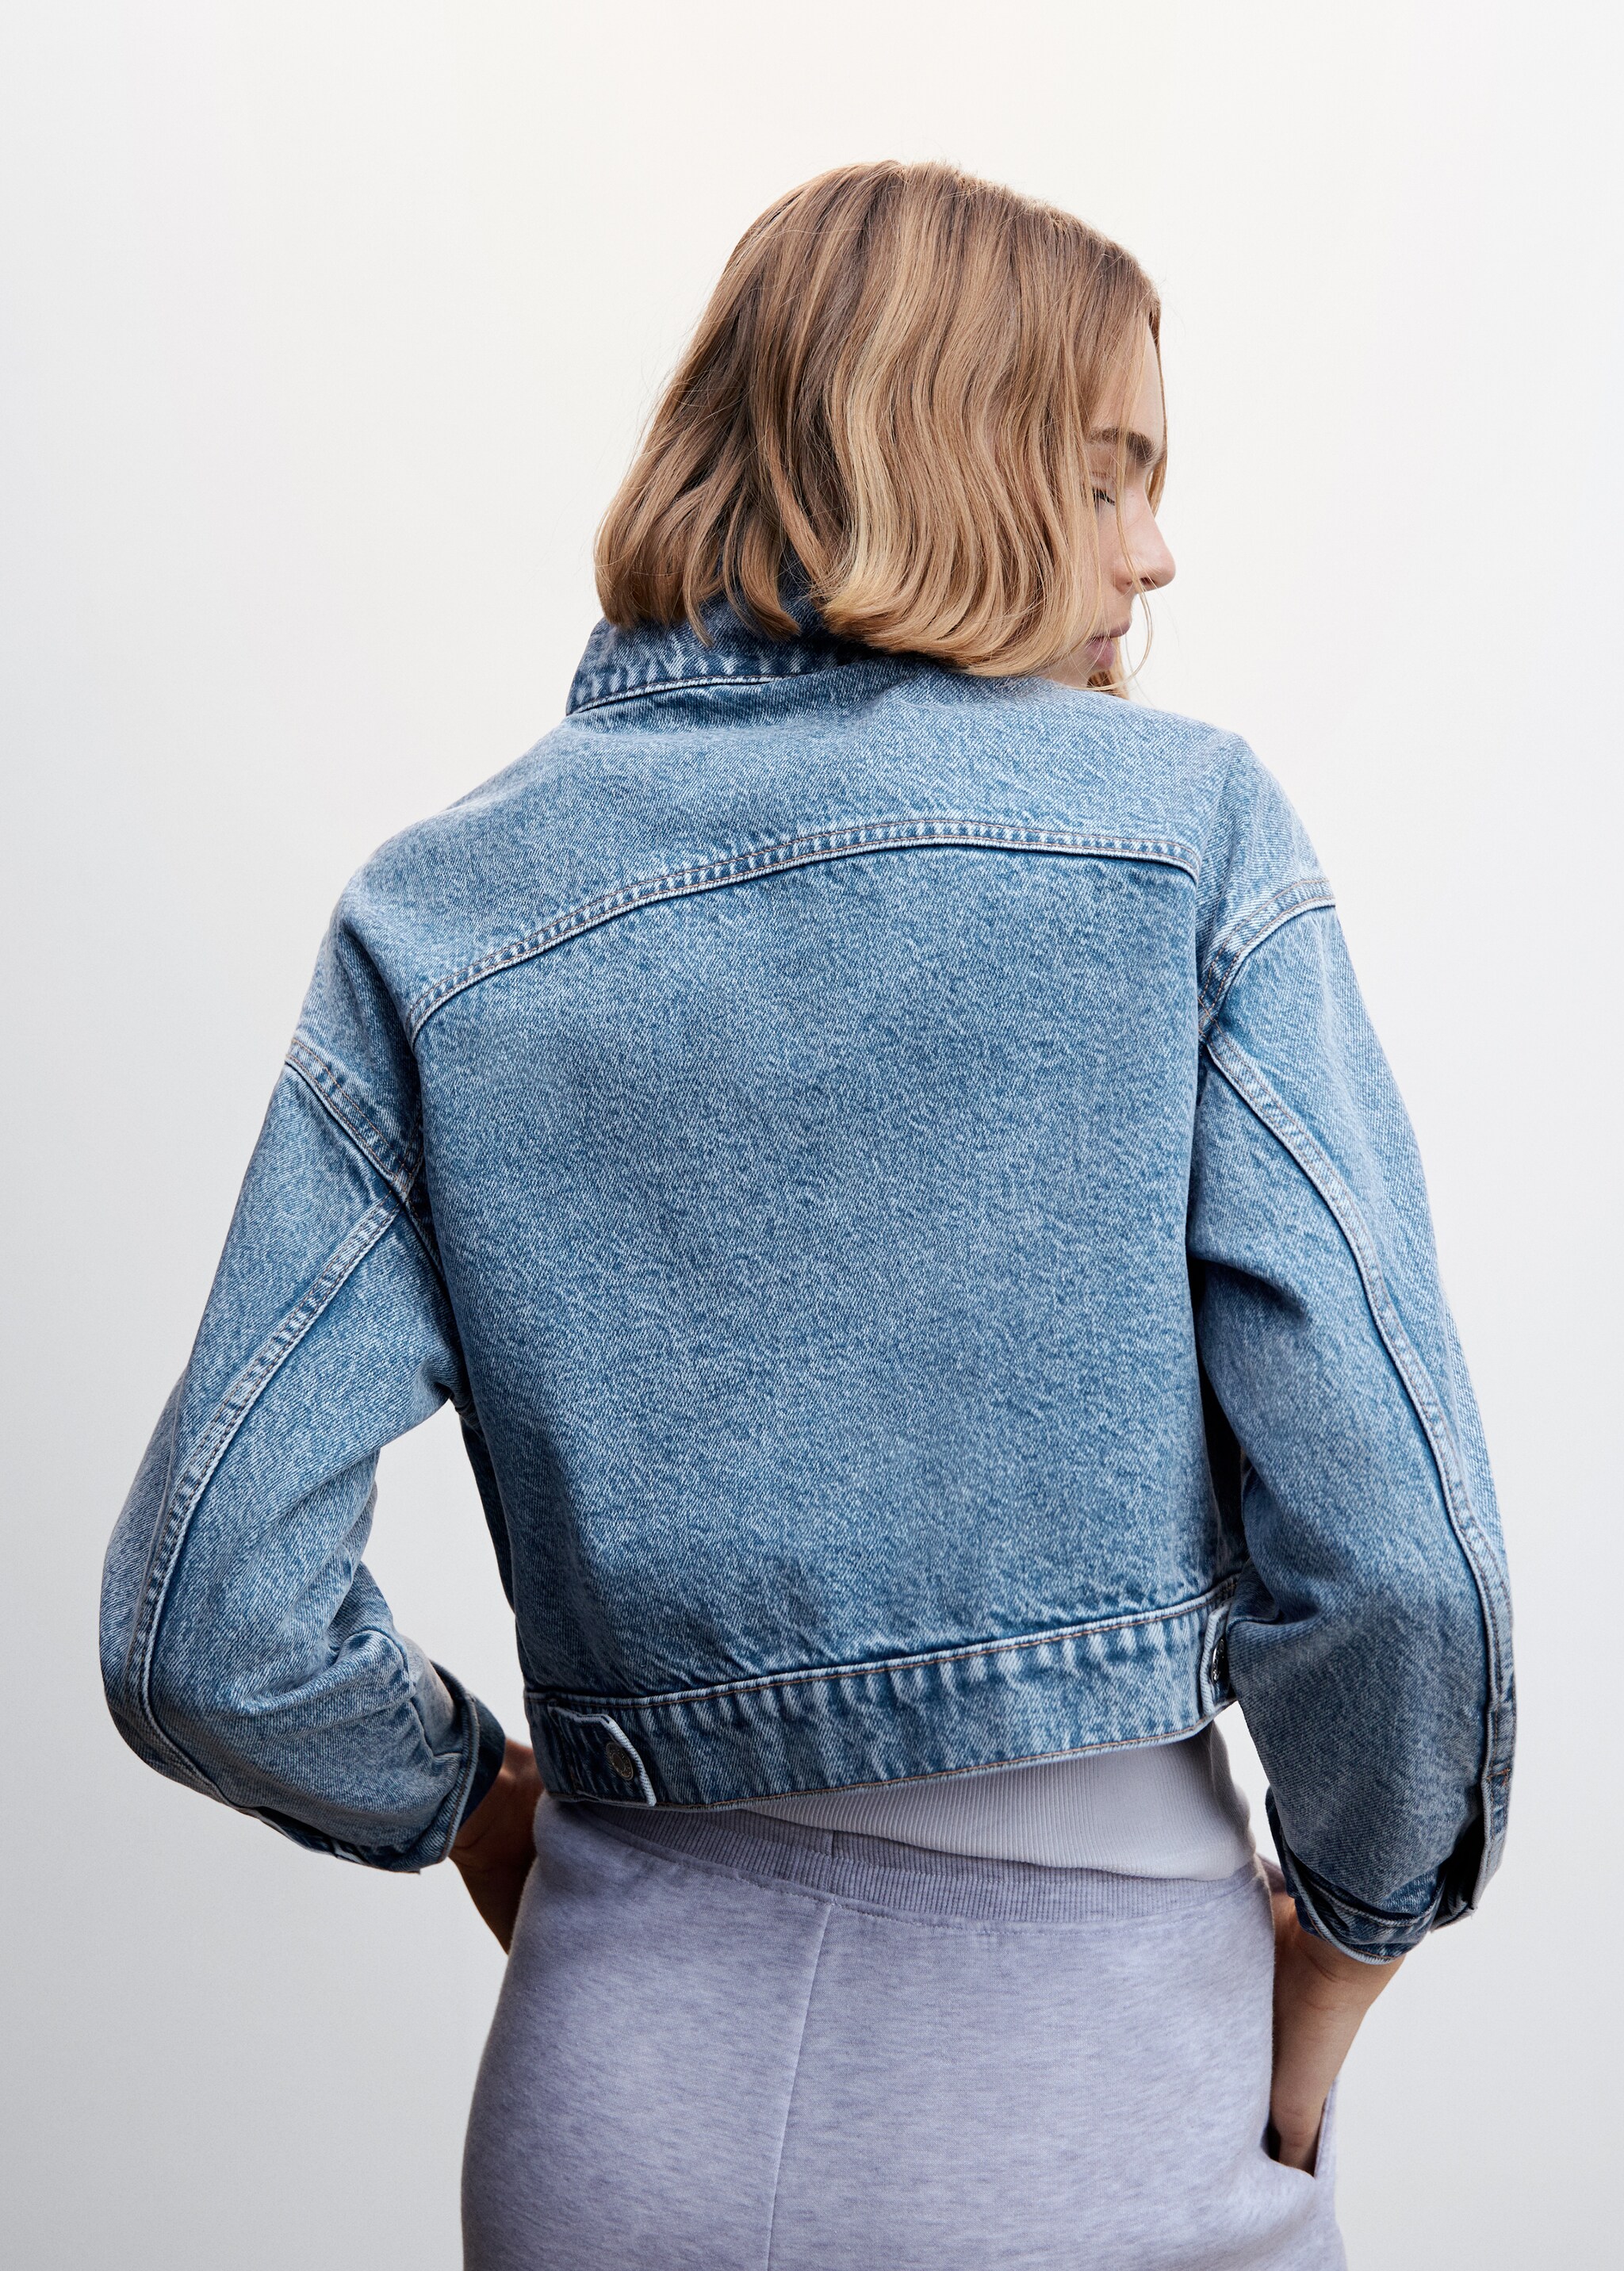 Pocketed denim jacket - Reverse of the article